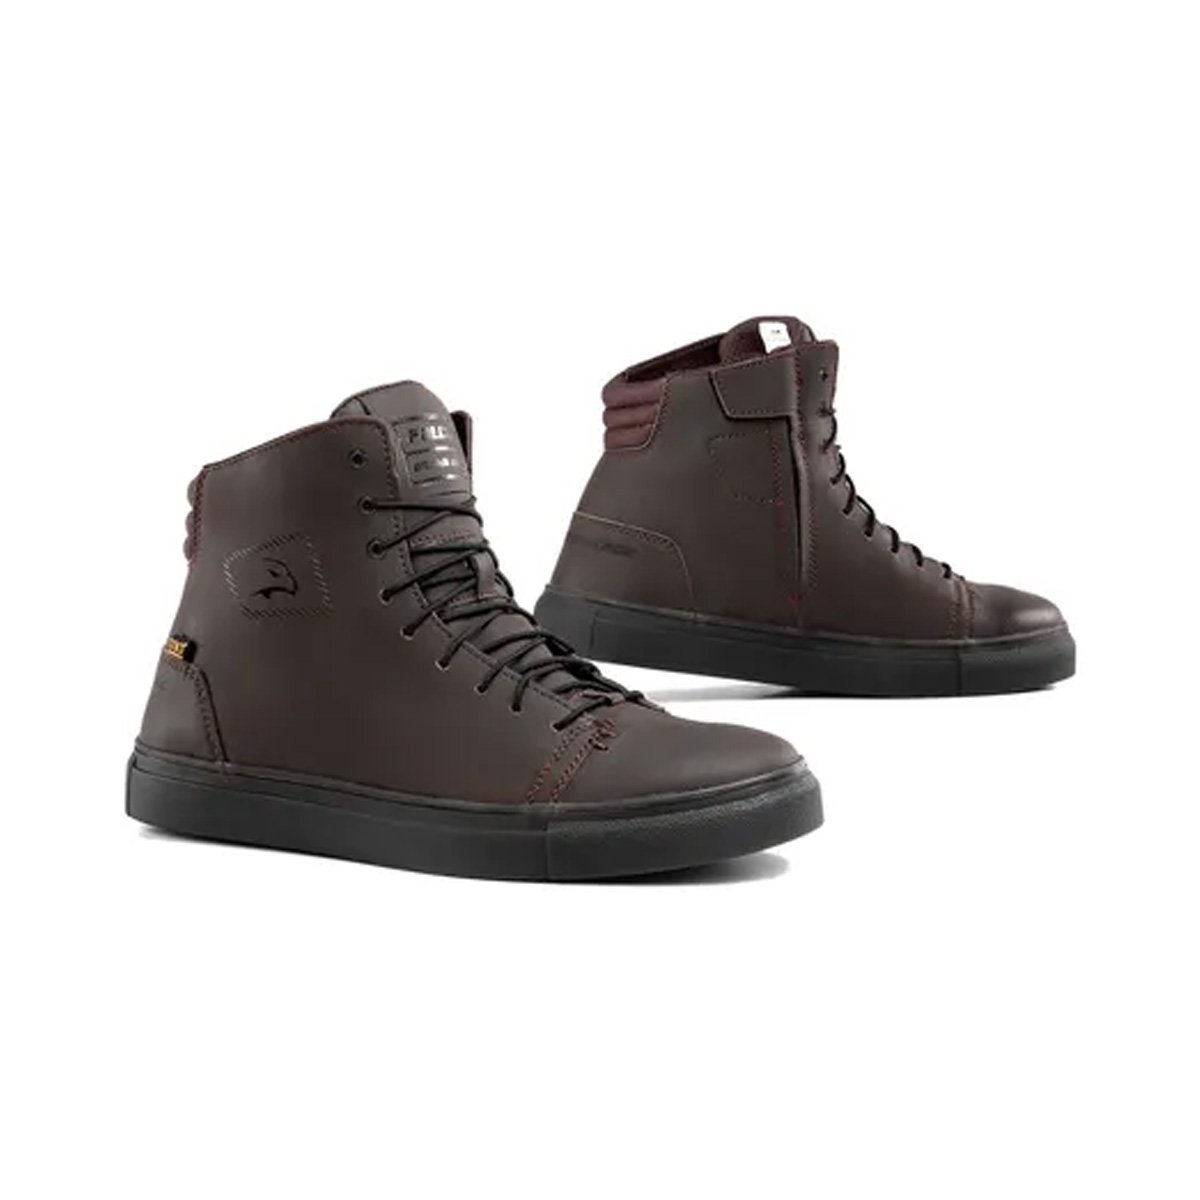 Image of Falco Nomad 2 Brown Size 41 ID 8052675494846